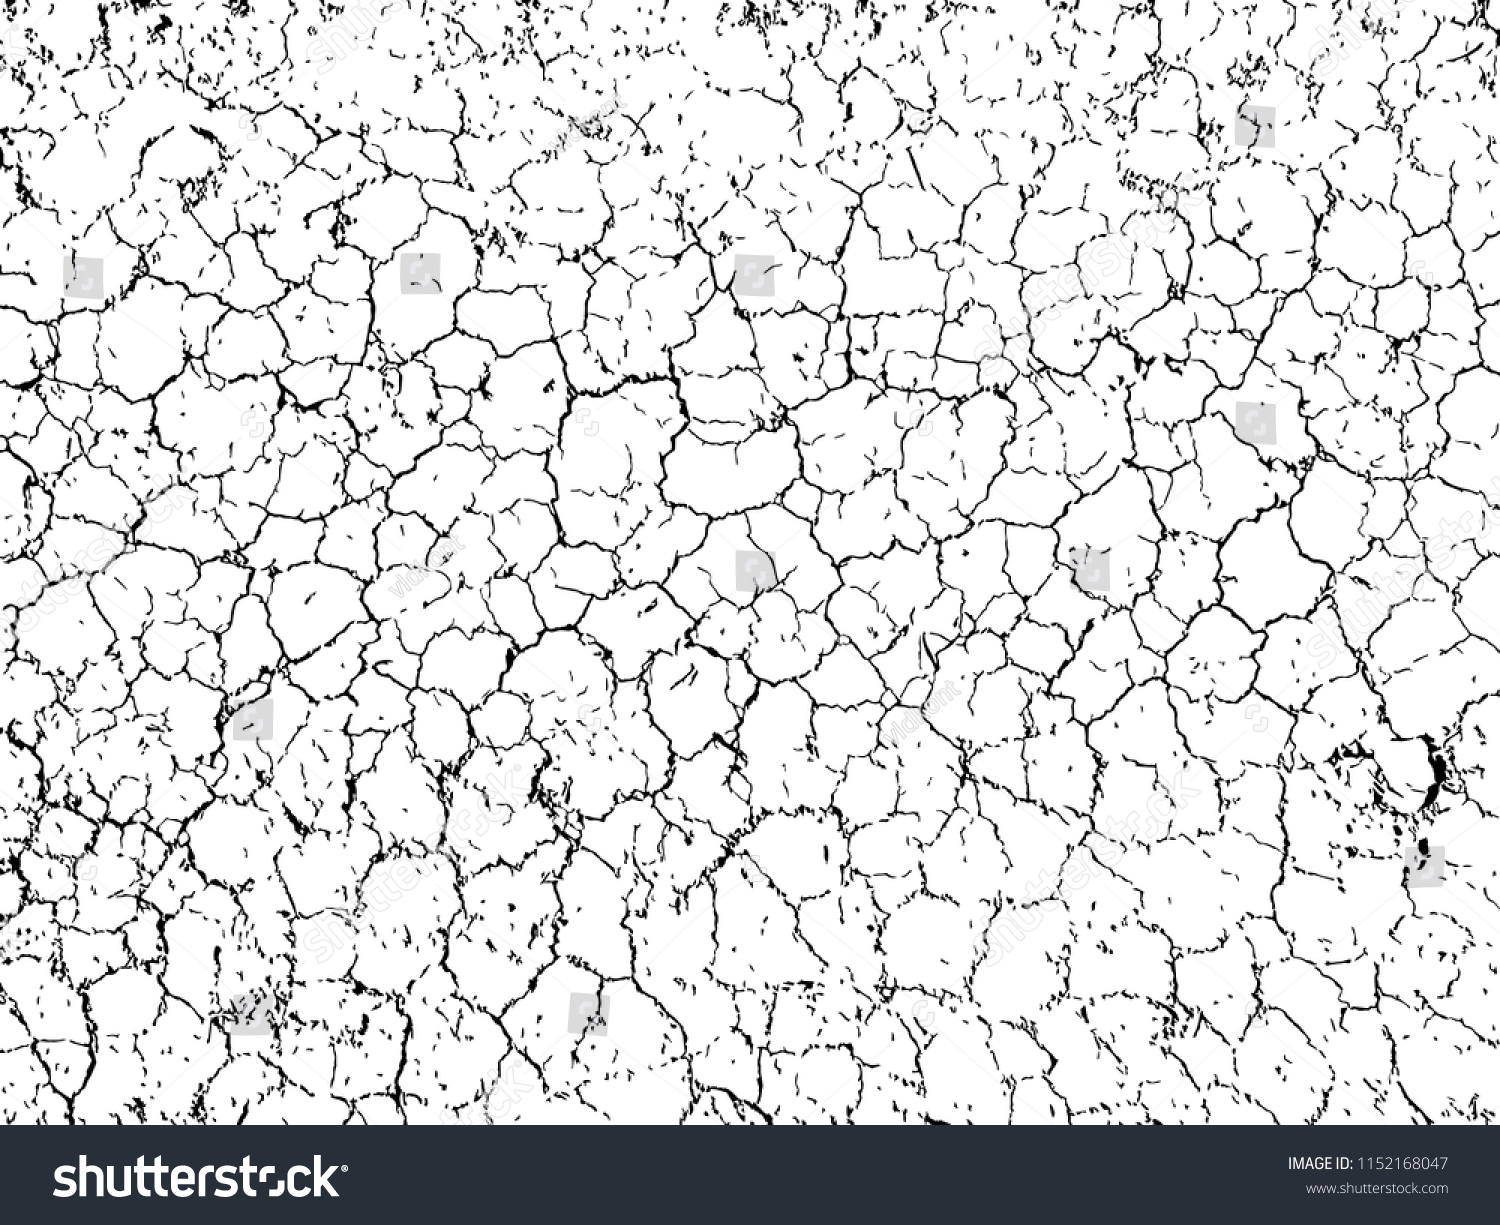 The cracks texture white and black. Vector background.Cracked earth. Structure of cracking. Cracks in dry surface soil texture. #1152168047